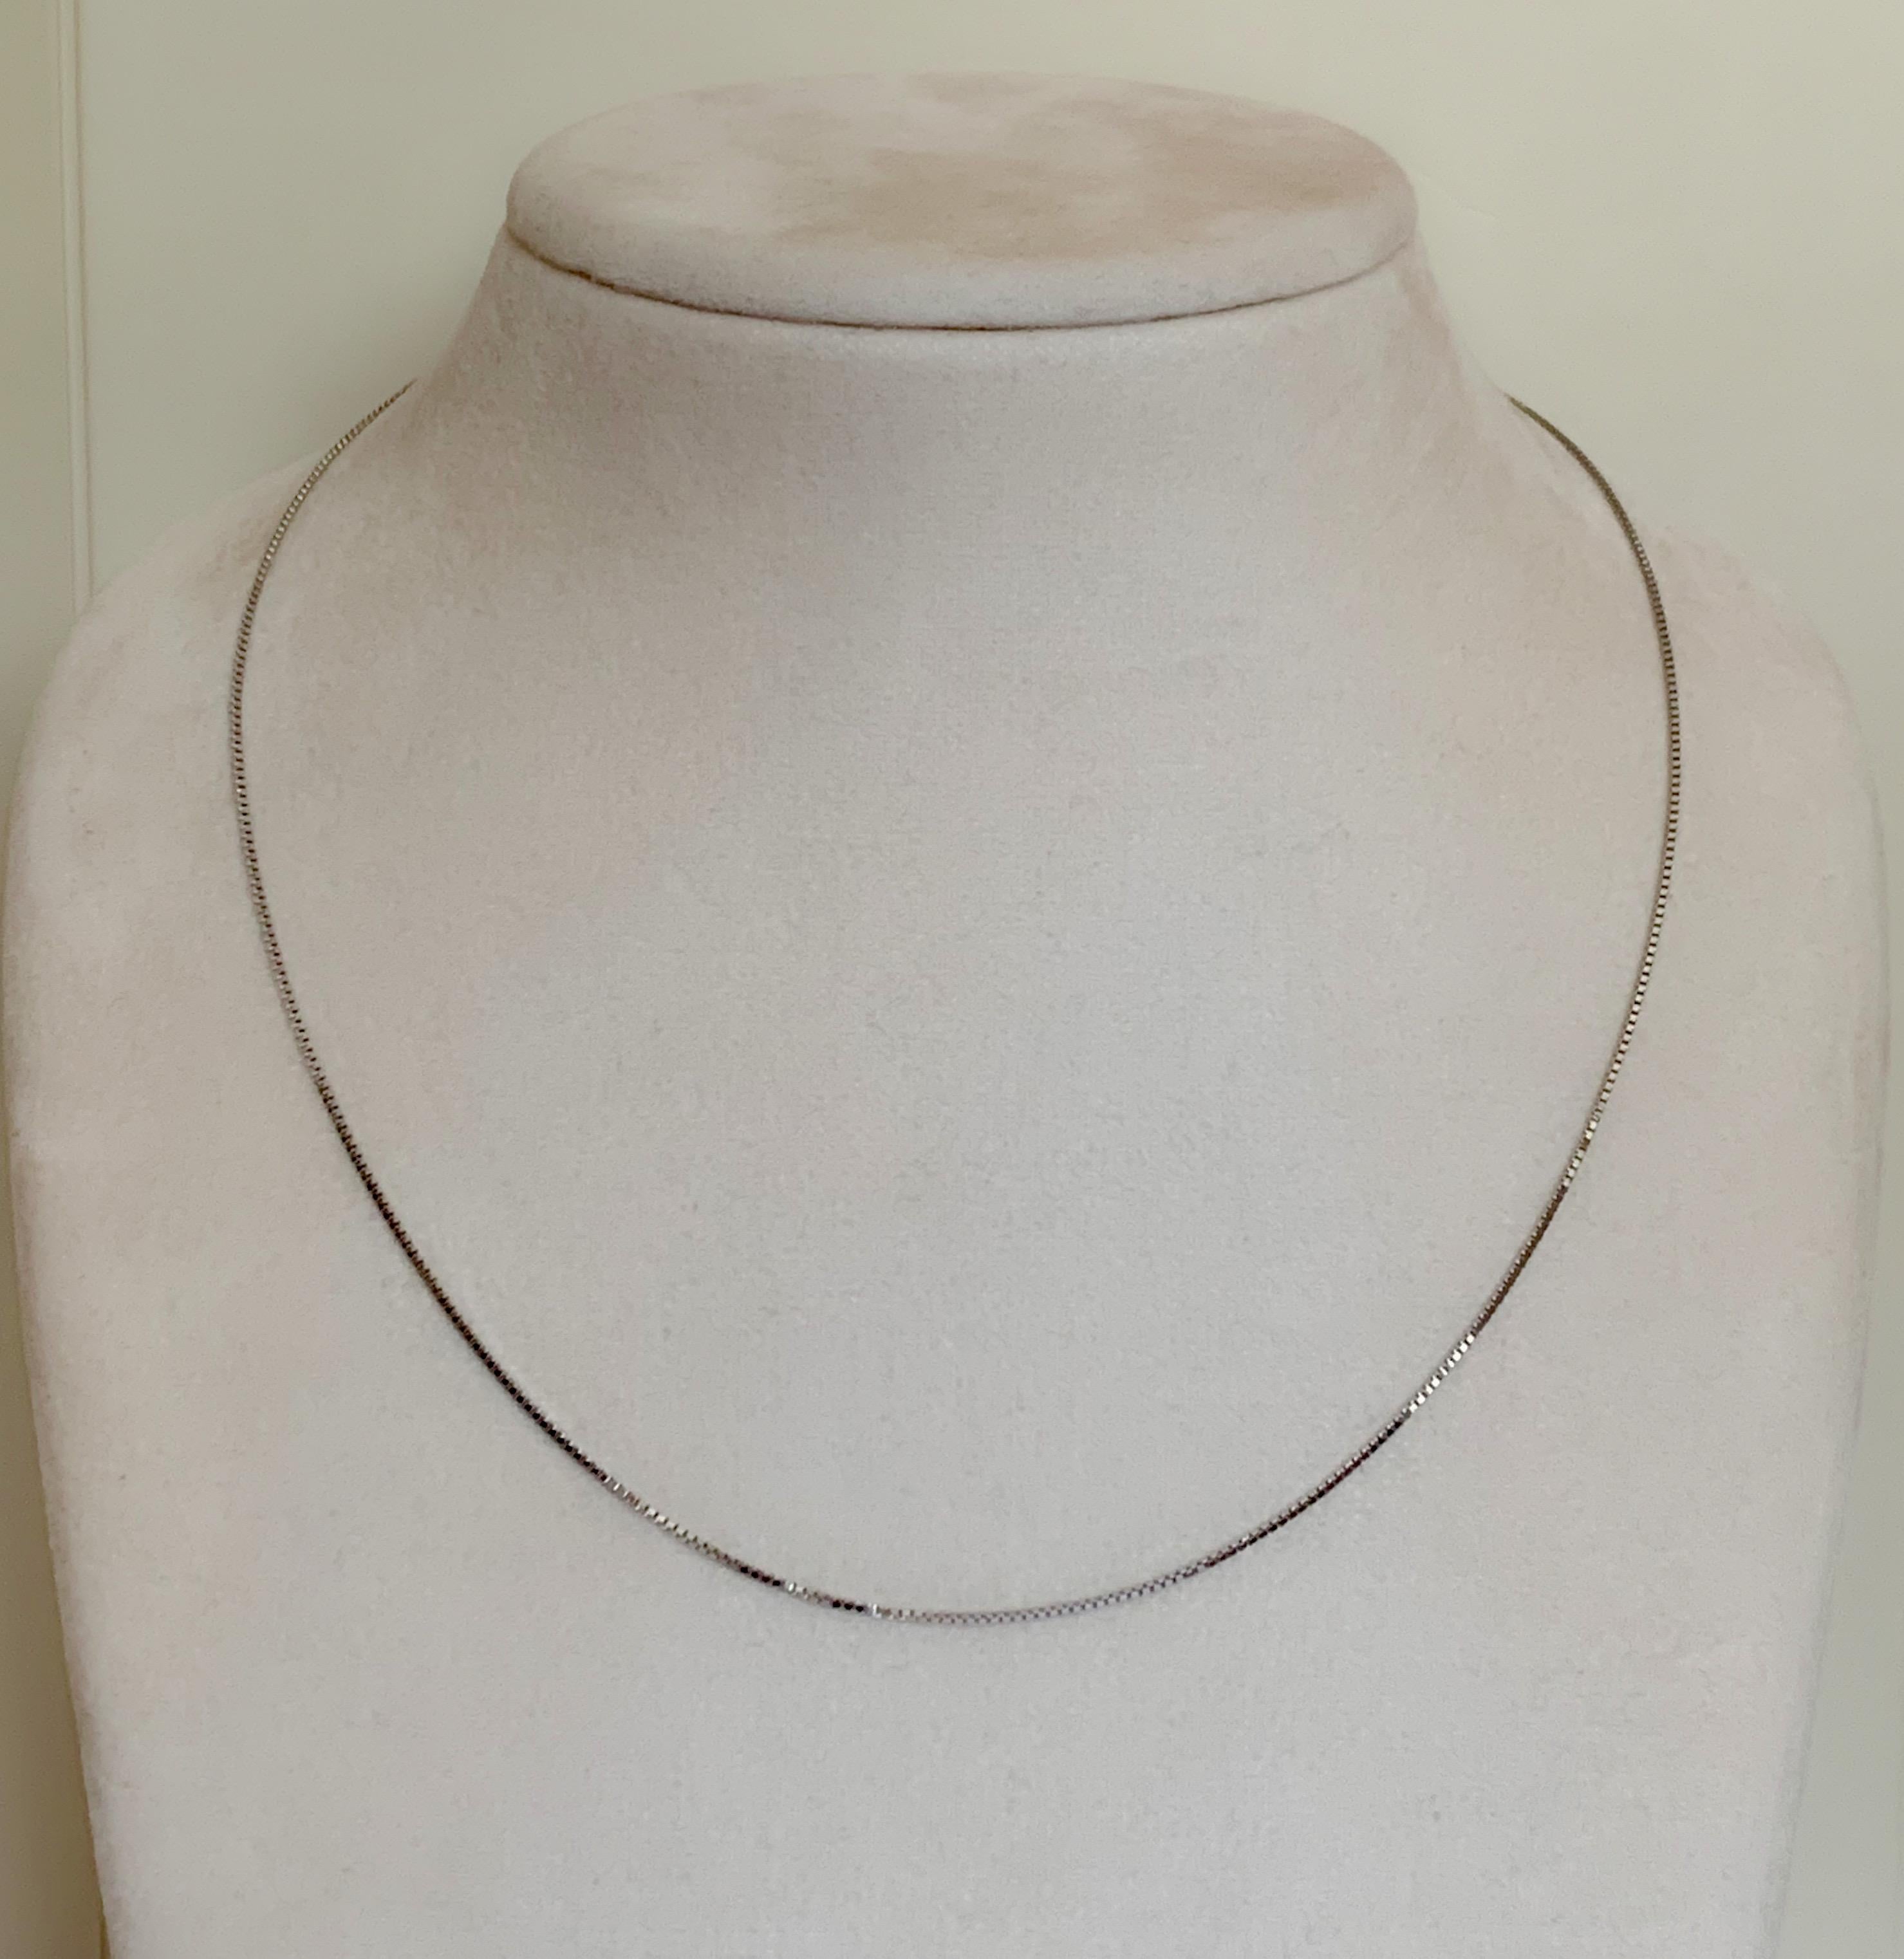 This Venice box chain necklace is made of 18Karat solid white gold.
Ideal to wear with pendants, layered with other chains or just on its own.
Length : 45.00 cm 
Gauge:   0.8mm
Hallmark: London’s Goldsmiths’ Company –  Assay Office 
All our